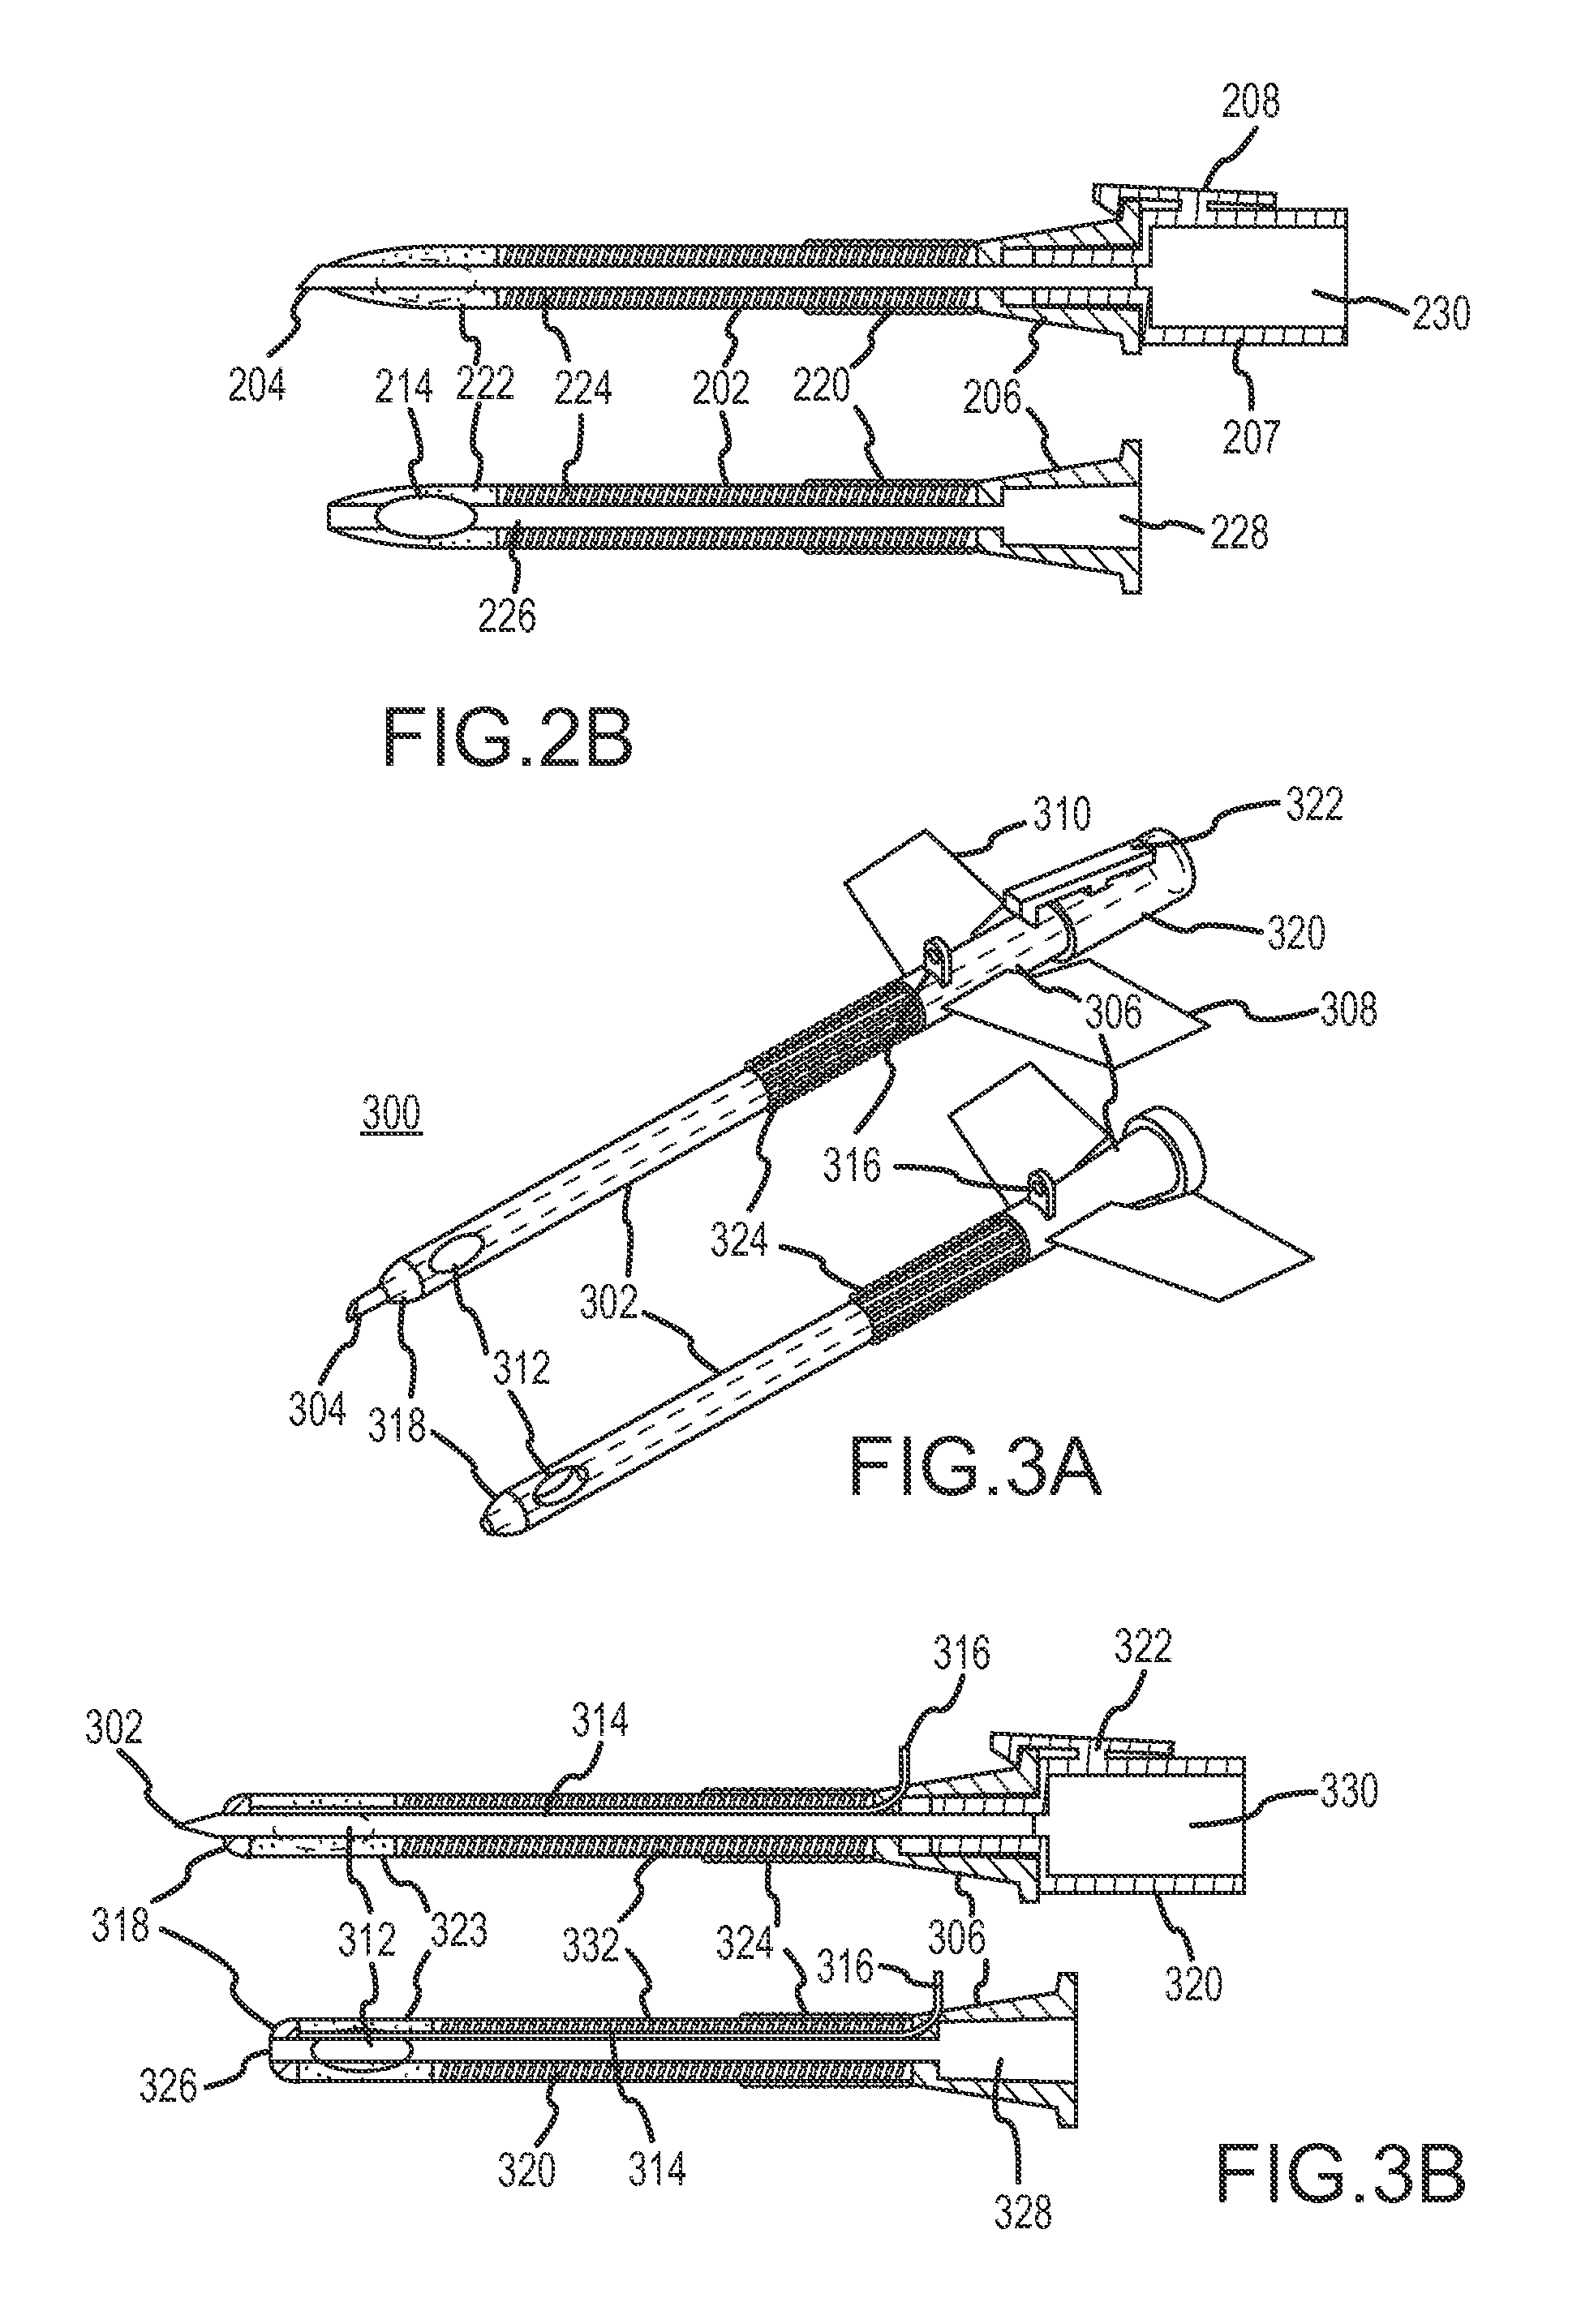 Continuous anesthesia nerve conduction apparatus, system and method thereof